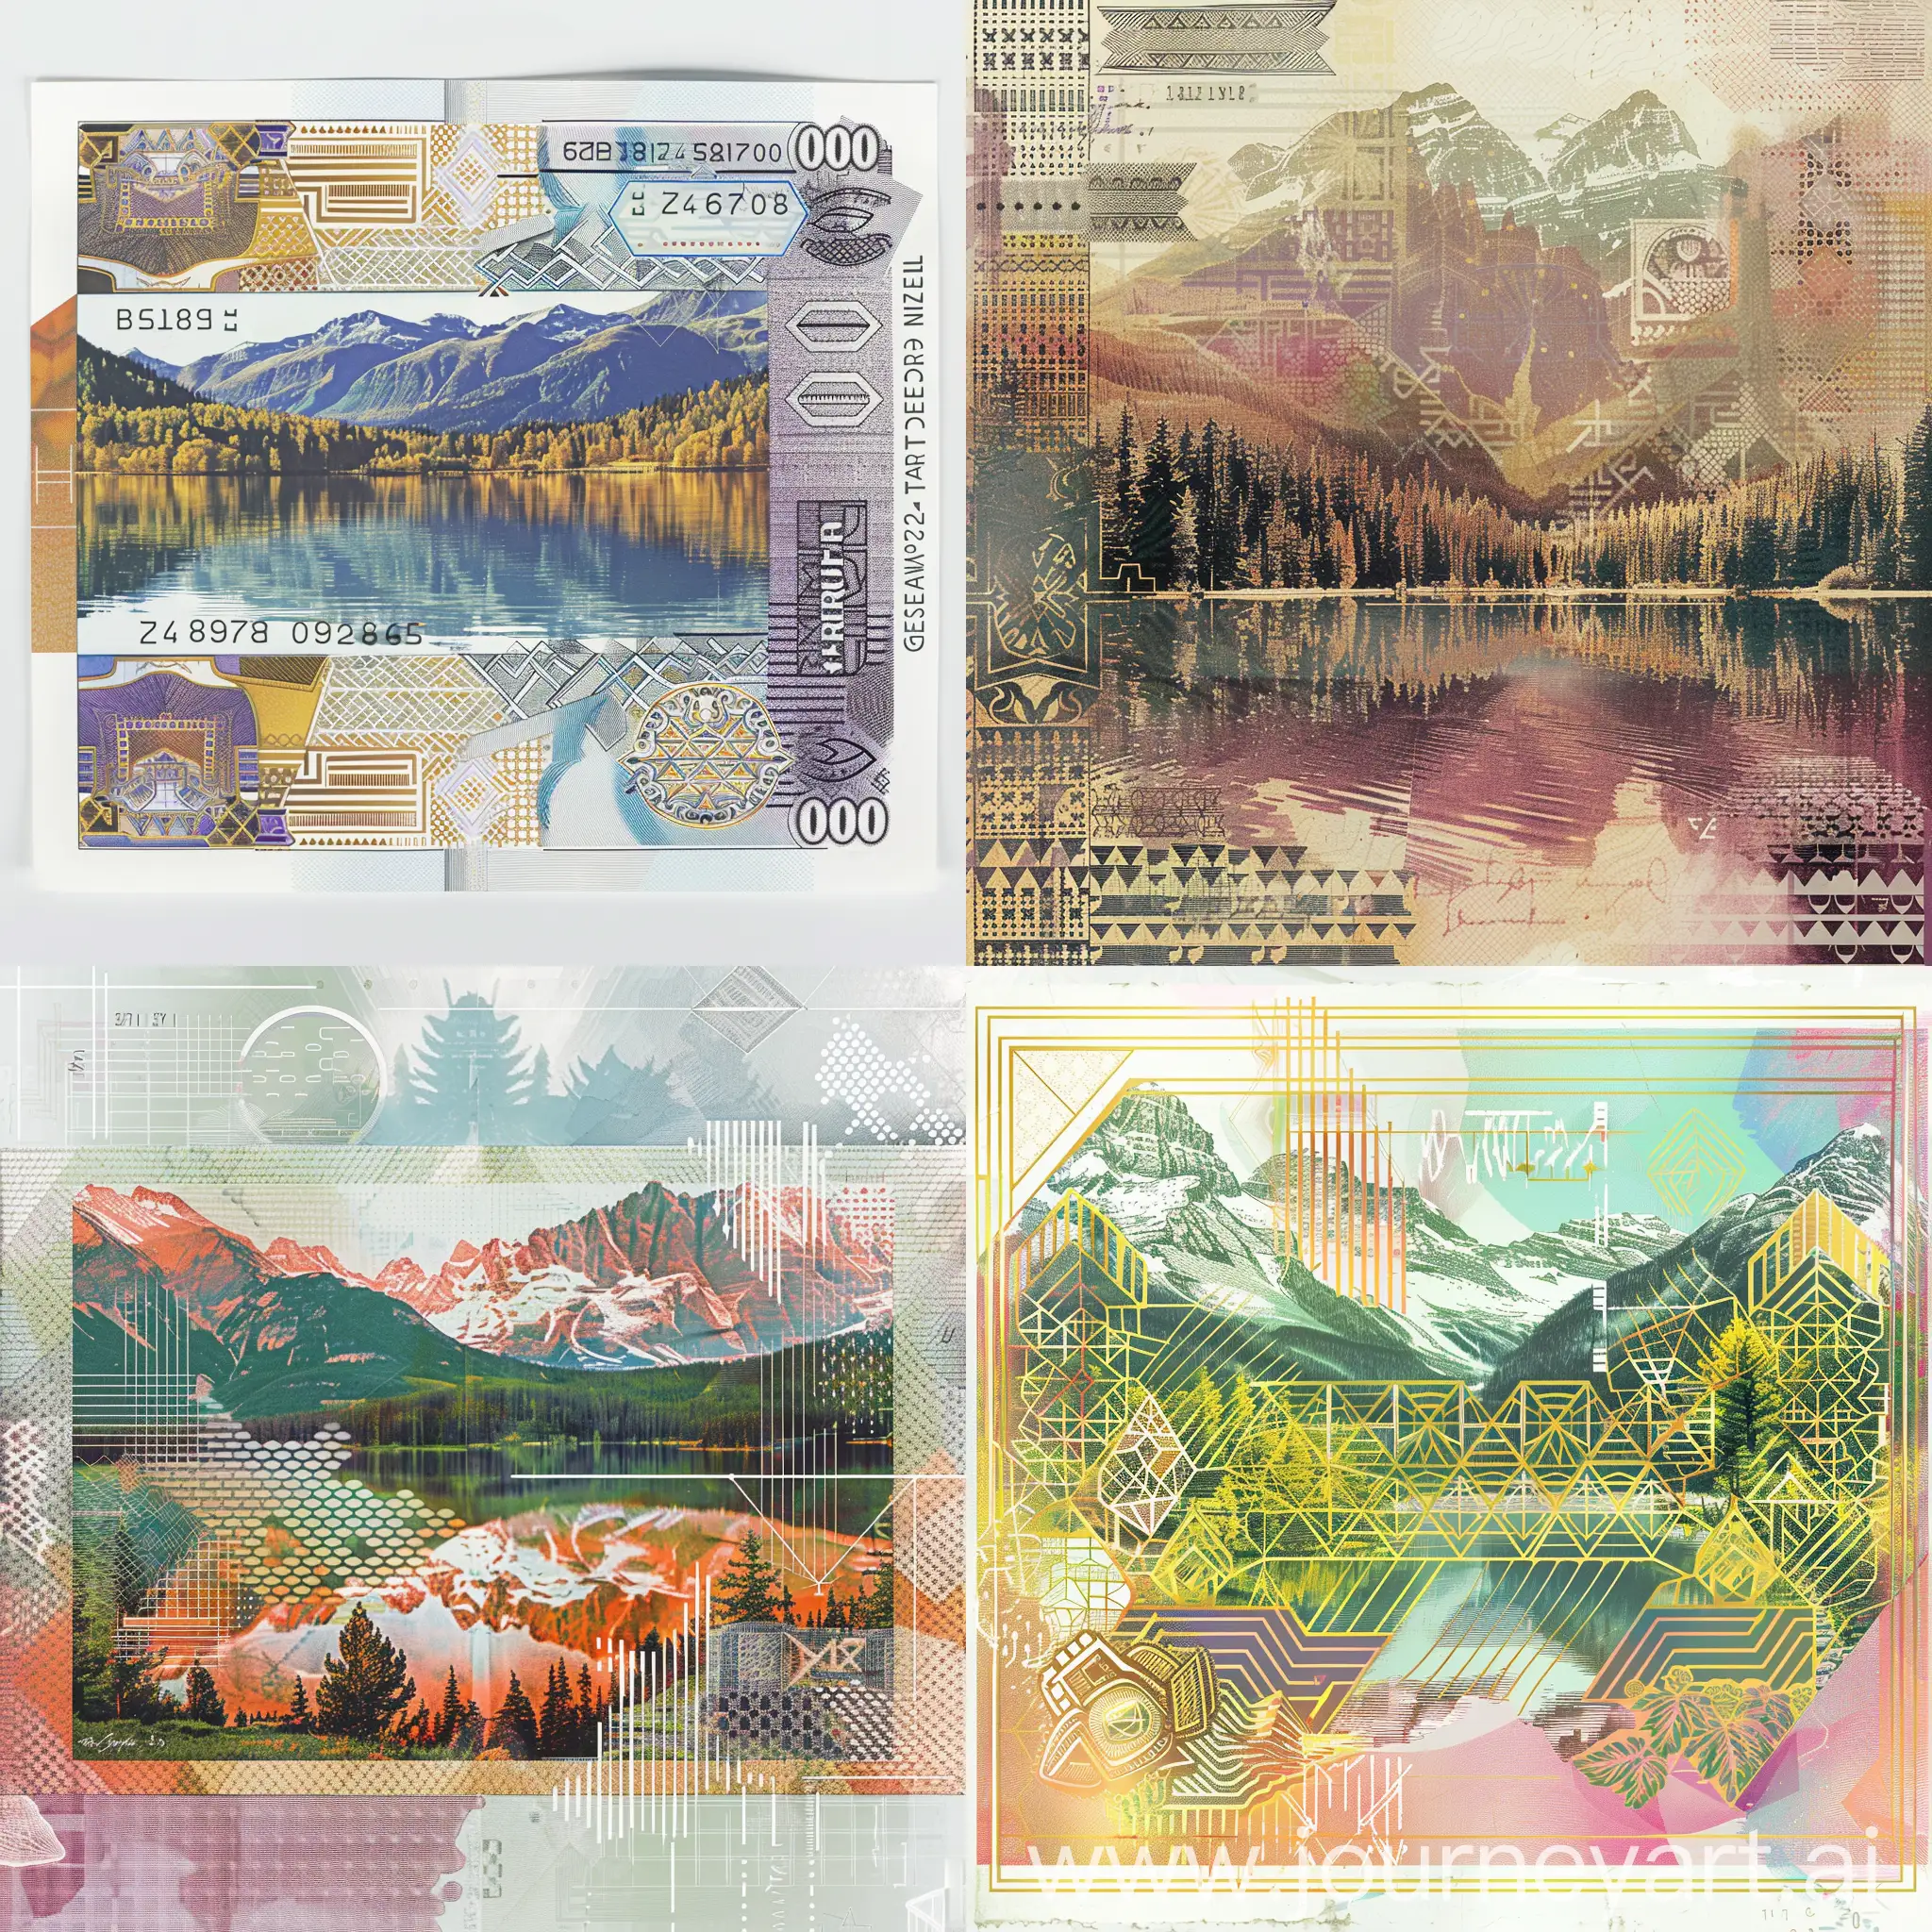 Modern-Bank-Note-Design-with-Natural-Landscape-and-Geometric-Patterns